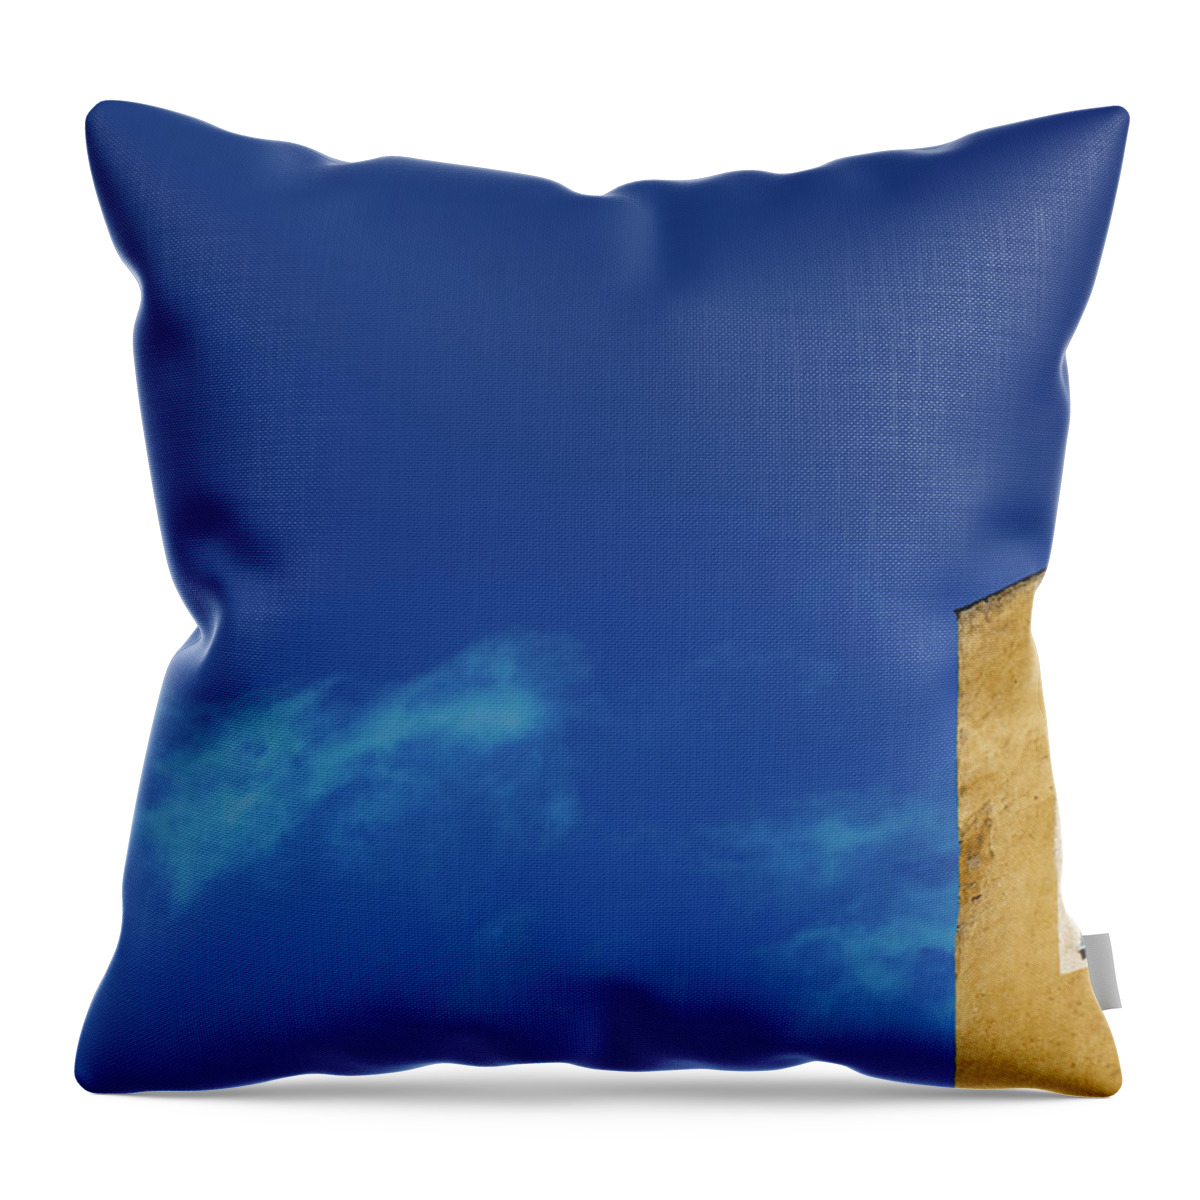 Tranquility Throw Pillow featuring the photograph House Window And Blue Sky by A. Aleksandravicius